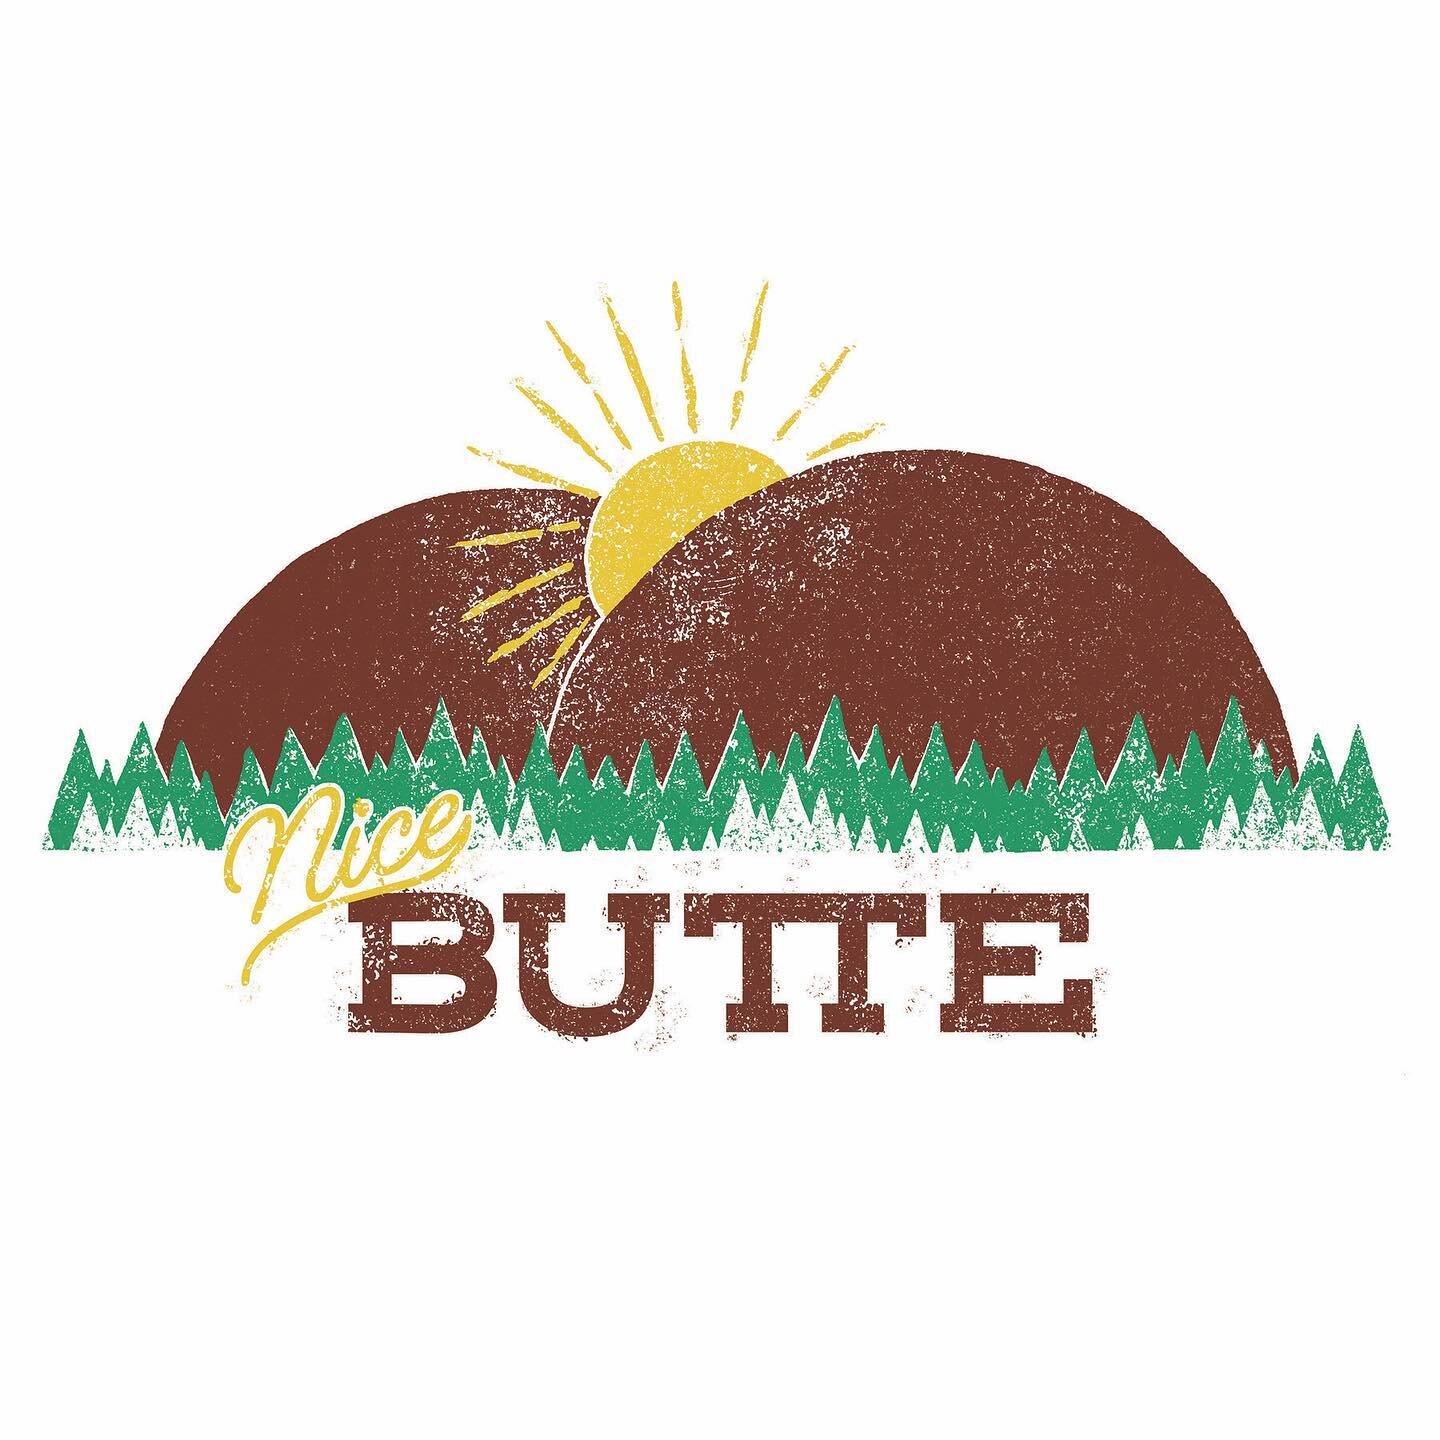 It&rsquo;s Fall! Time to get out for some great hikes and good laughs. 

#boise #idaho #halfbasquejob #hiking #hikeidaho #butte #nicebutte #teeshirt #tee #illustrator #texture #scenic #truegrittexturesupply #wherethesunalwaysshines #photoshop #funnyt